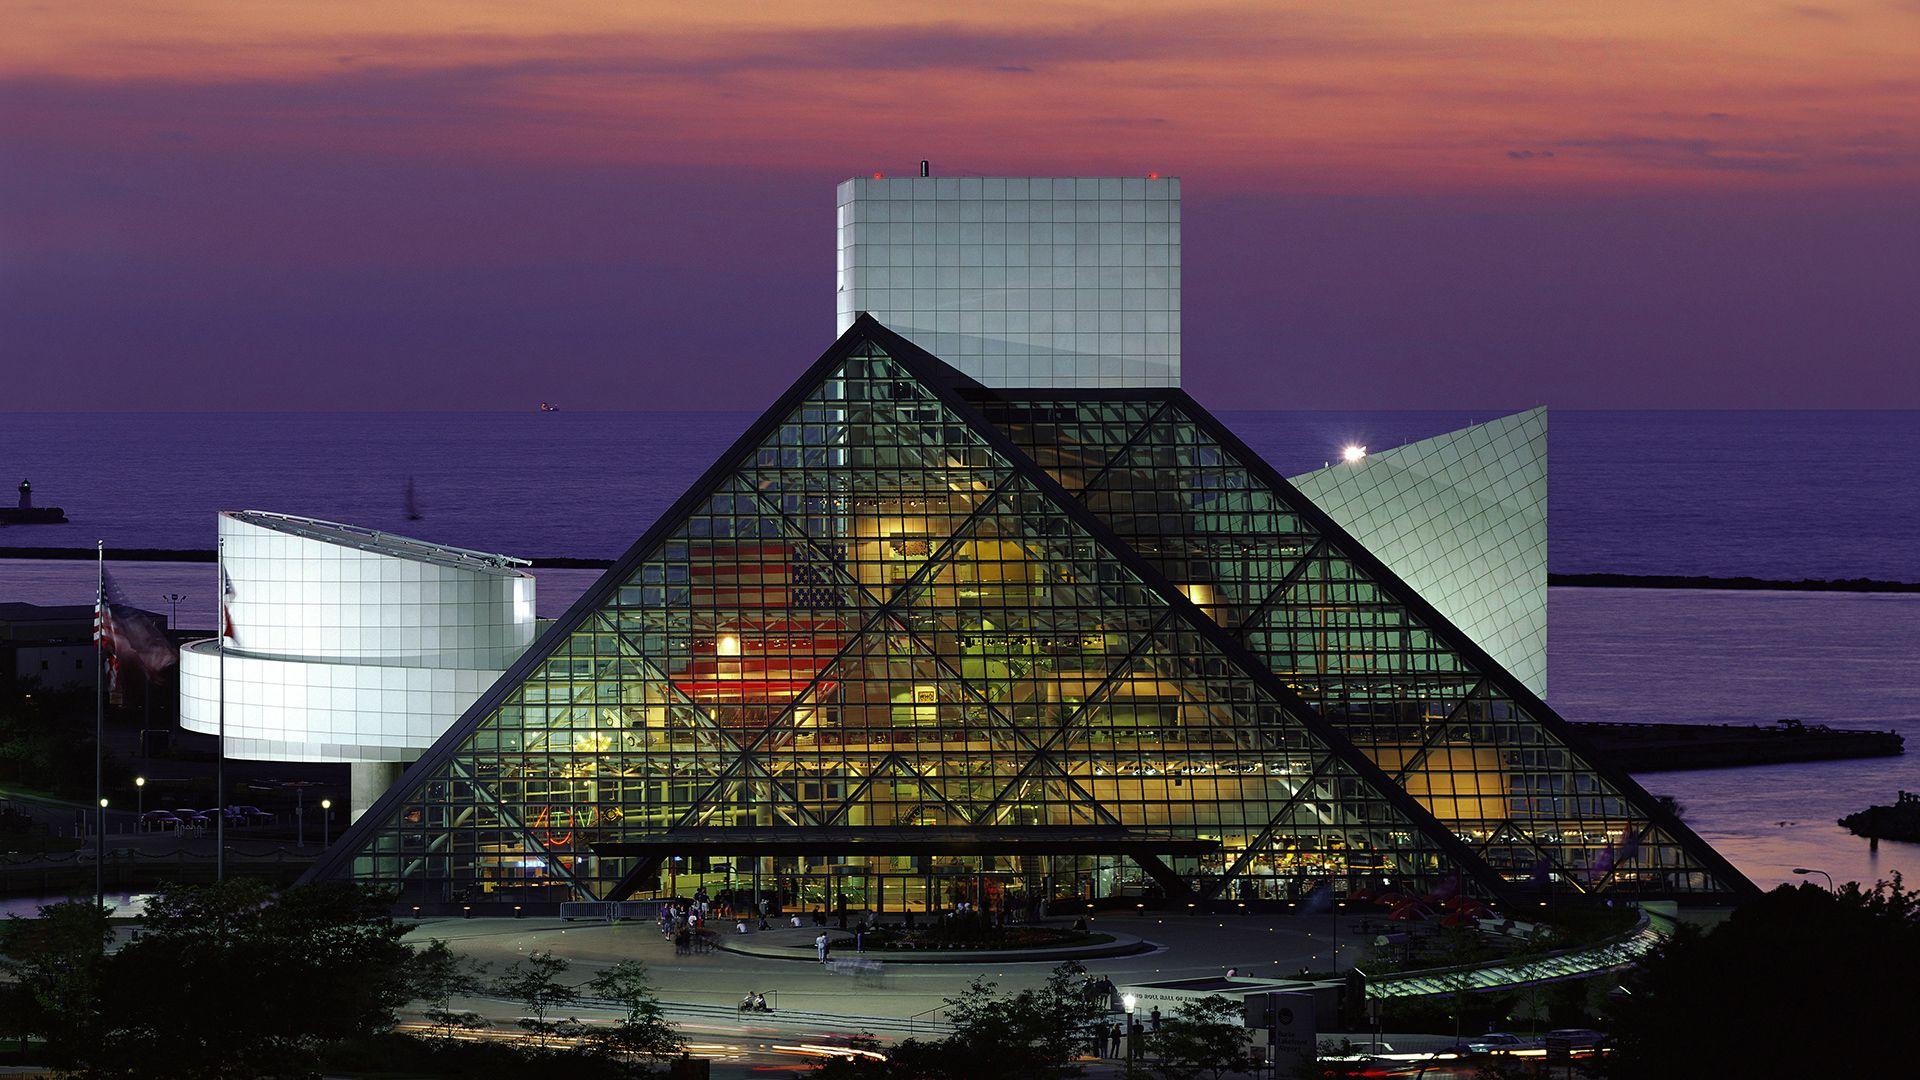 A Rockin' Road Trip to the Rock and Roll Hall of Fame